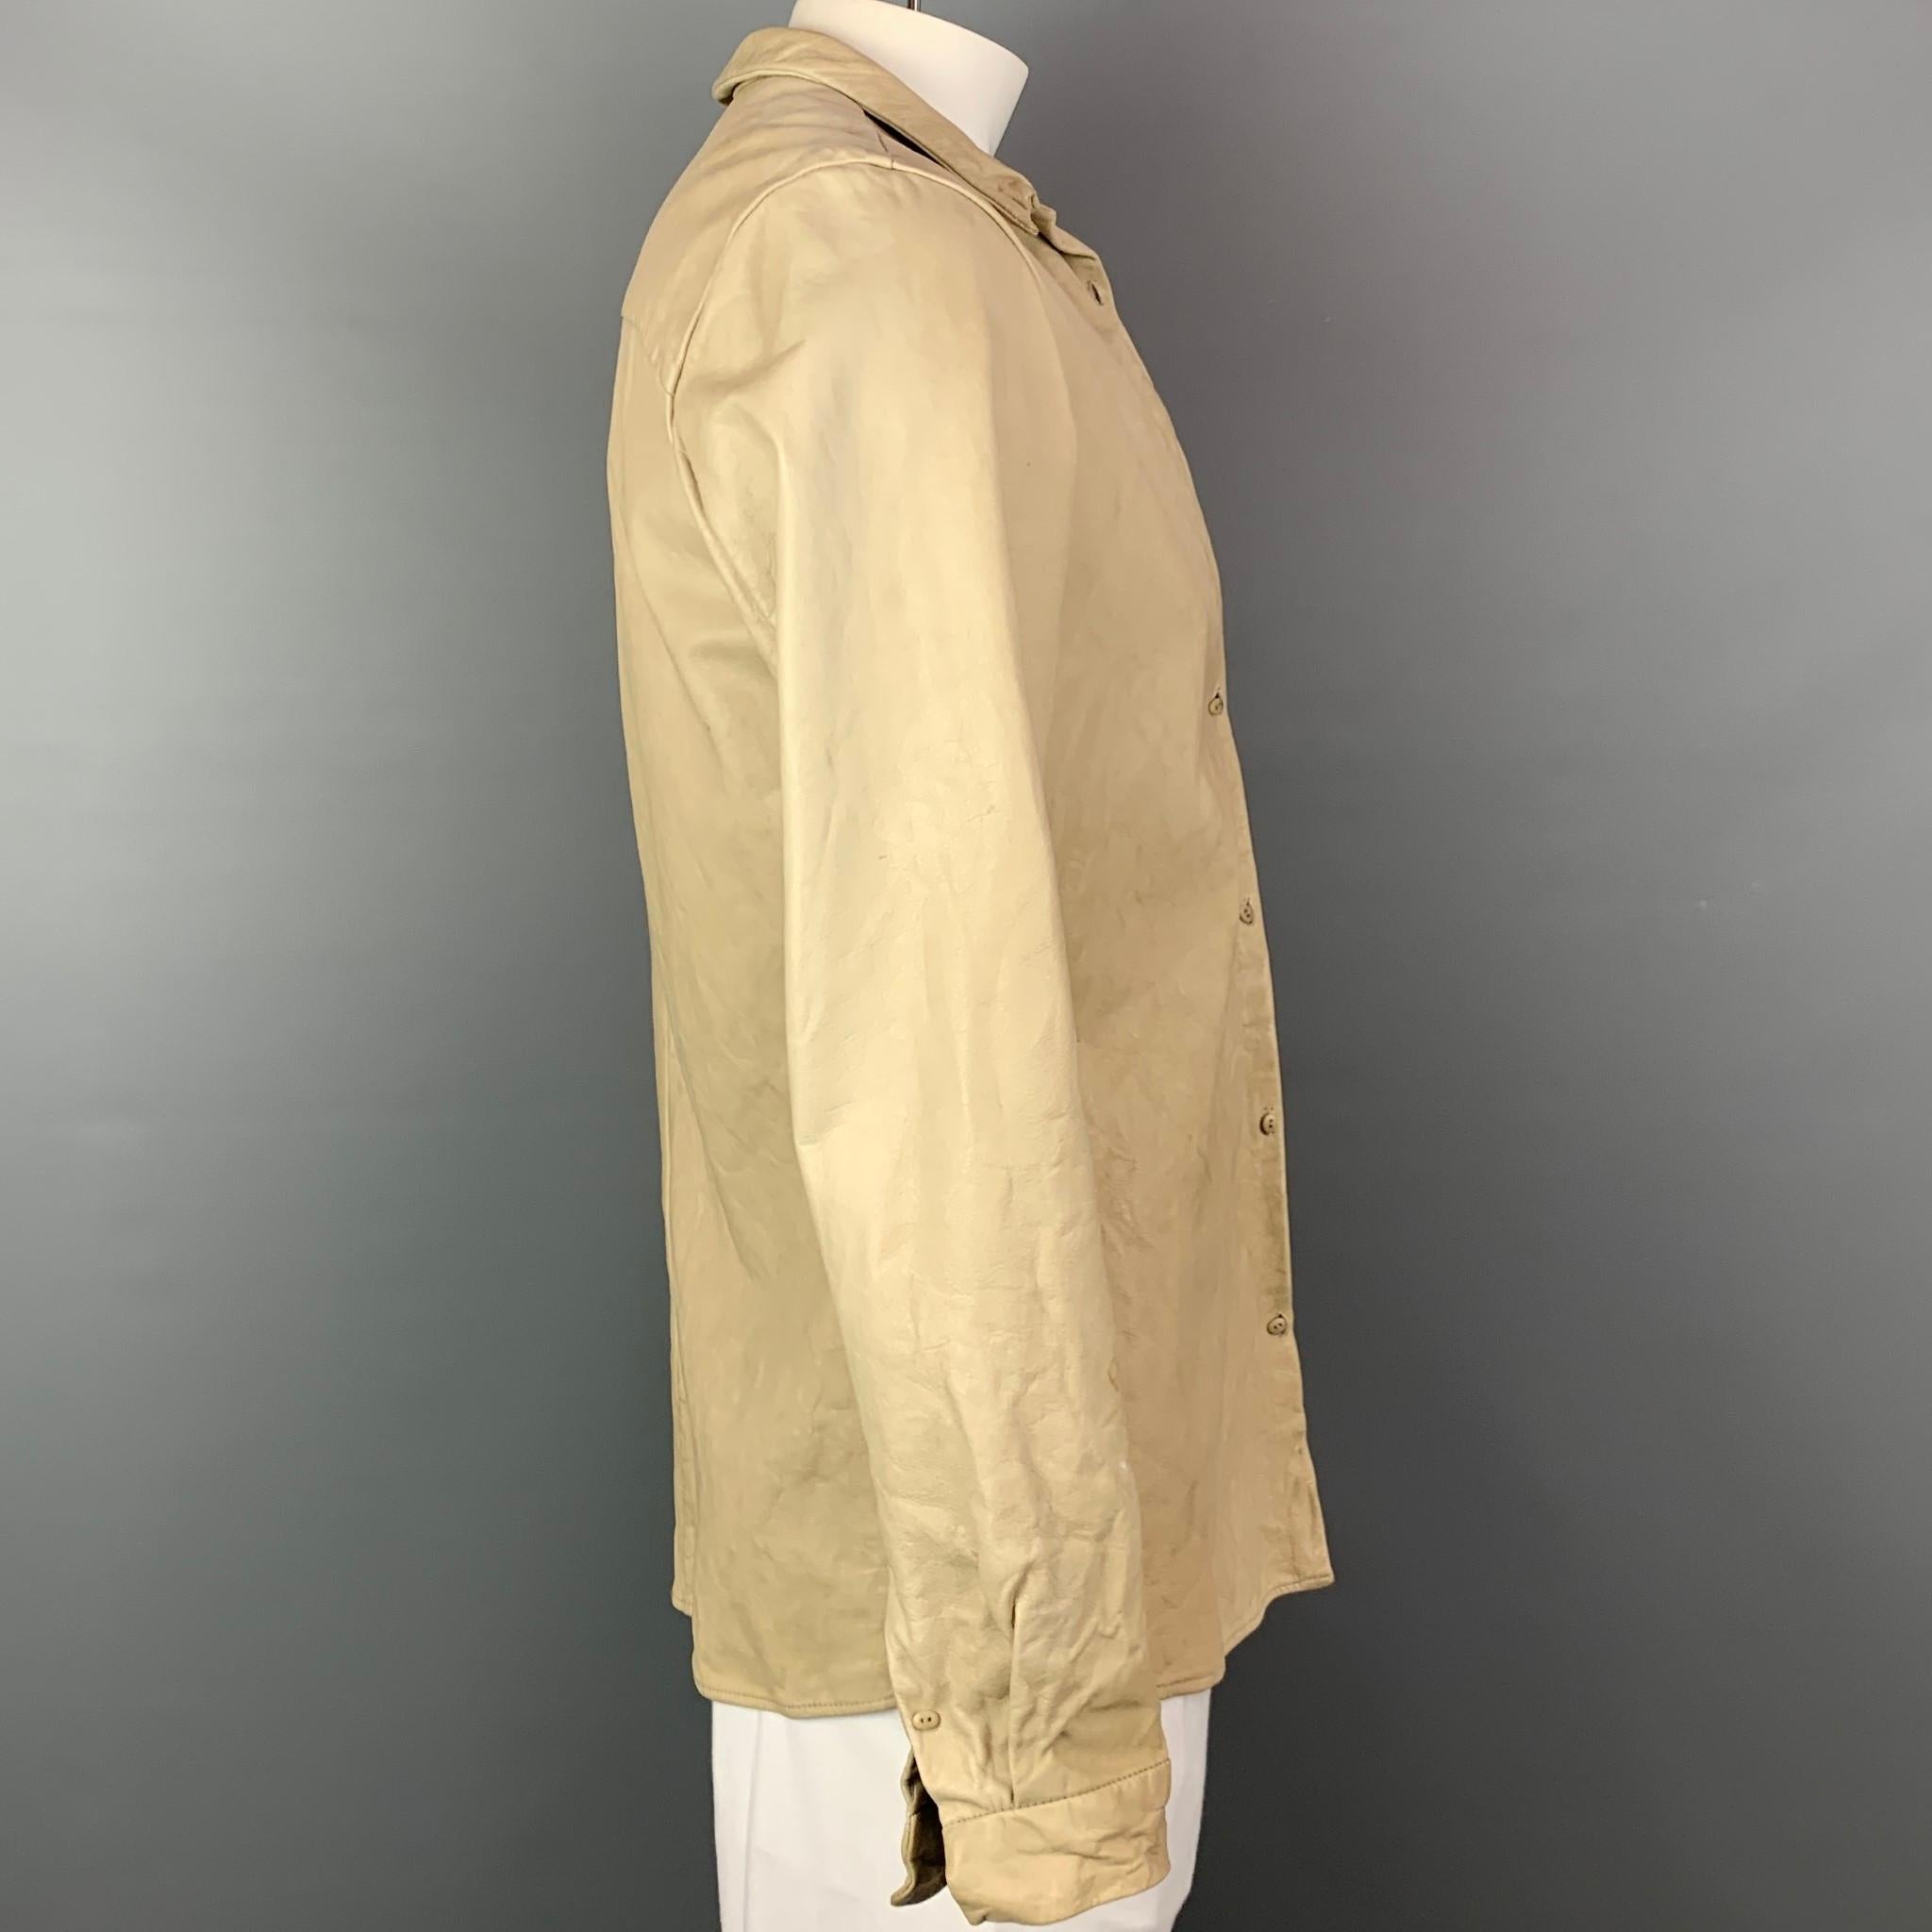 VINTAGE jacket comes in a beige leather with no liner featuring a spread collar and double button closure. Missing one button, and has minor wear.

Good Pre-Owned Condition.
Marked: Missing fabric tag.

Measurements:

Shoulder: 18 in.
Chest: 42